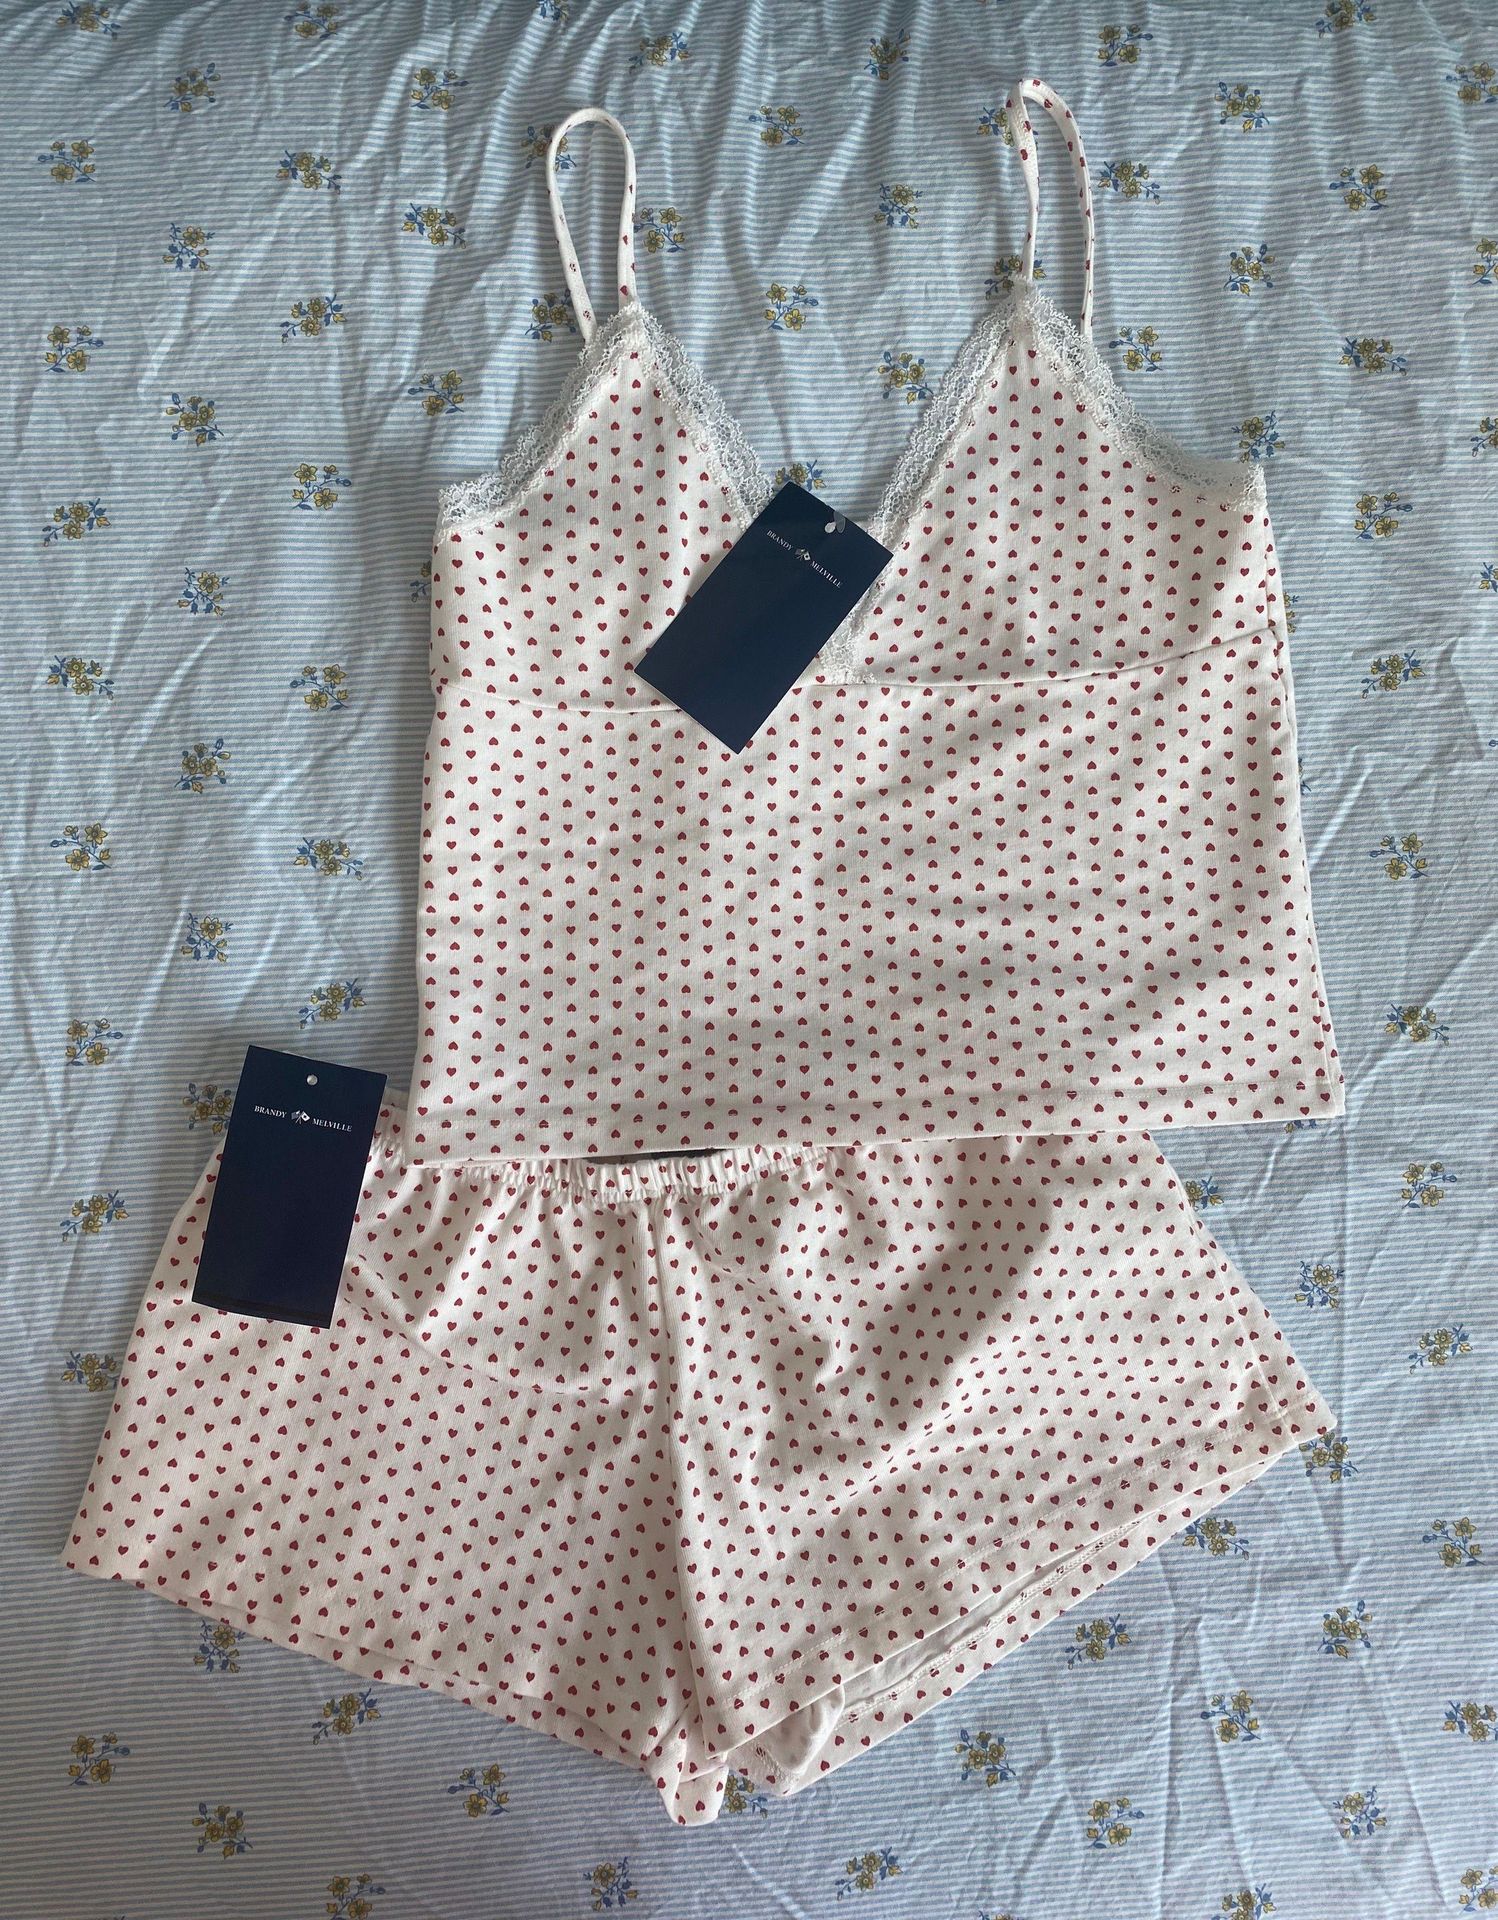 Brandy Melville Heart Pajama Set White - $50 New With Tags - From Beatrice